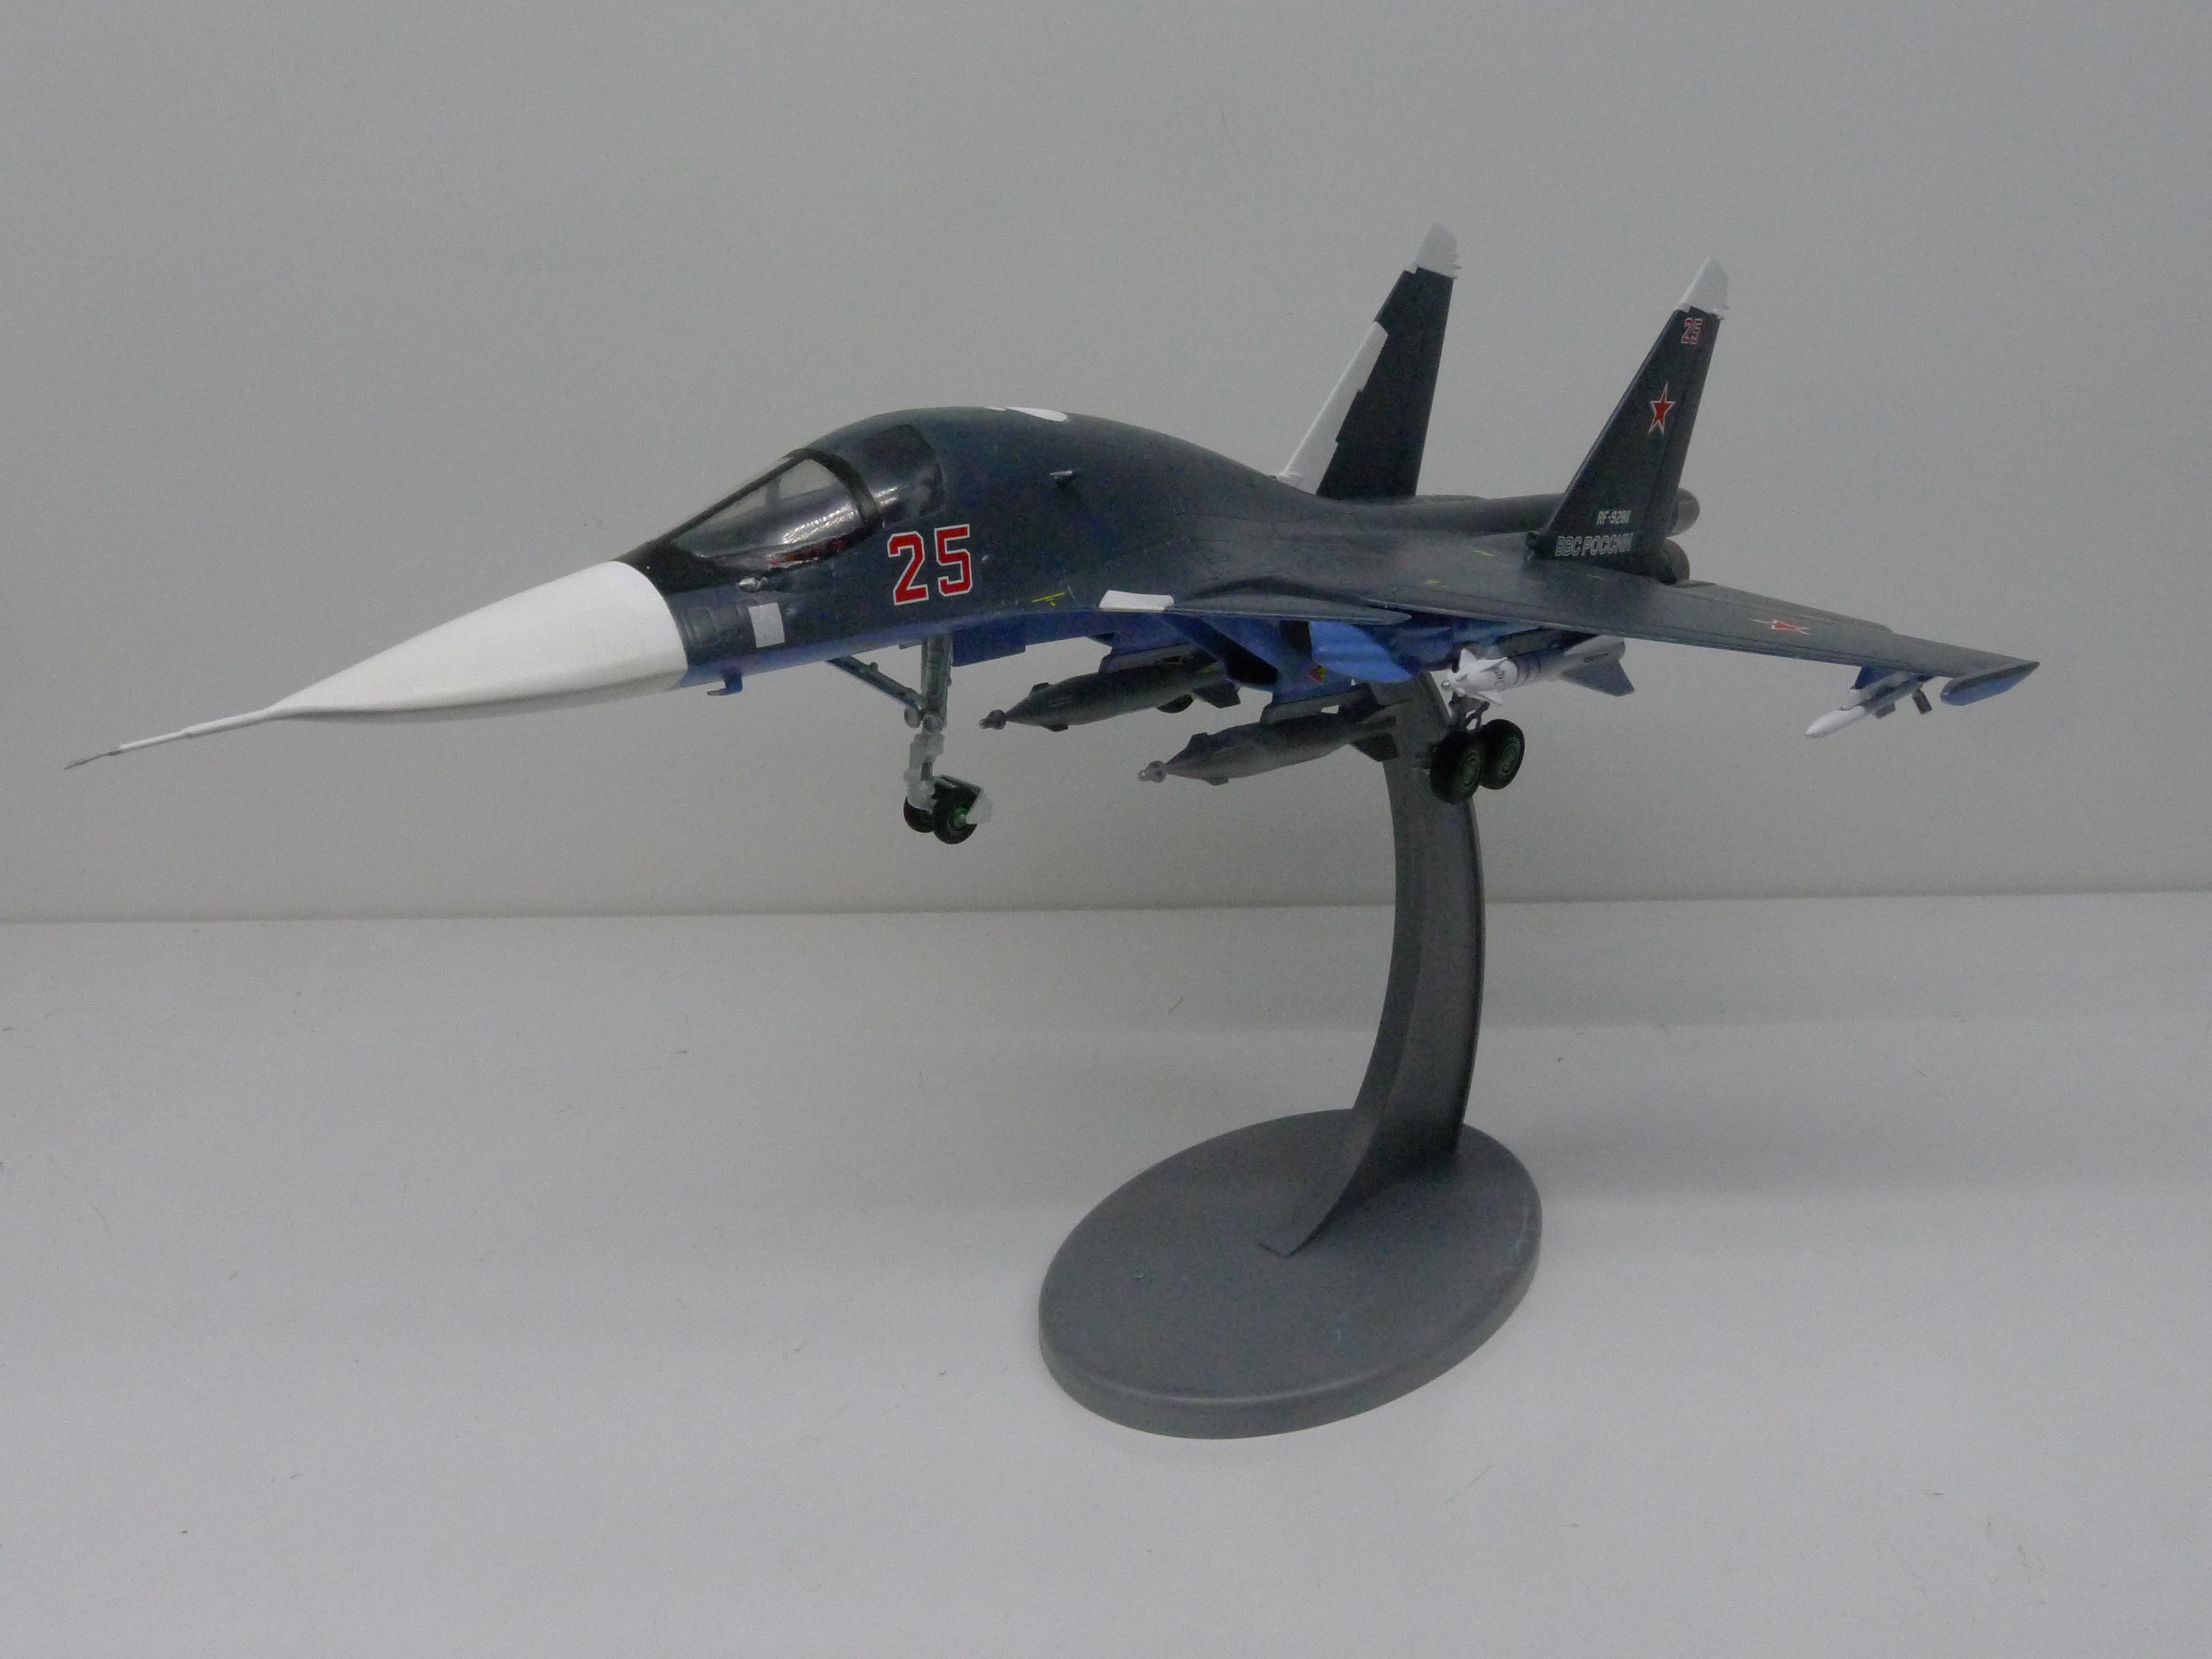        -34  1:72,   28 . ,  .  Model Russian front-line aircraft, the Su-34. Scale 1:72, hand made. # 2 hobbyplus.ru